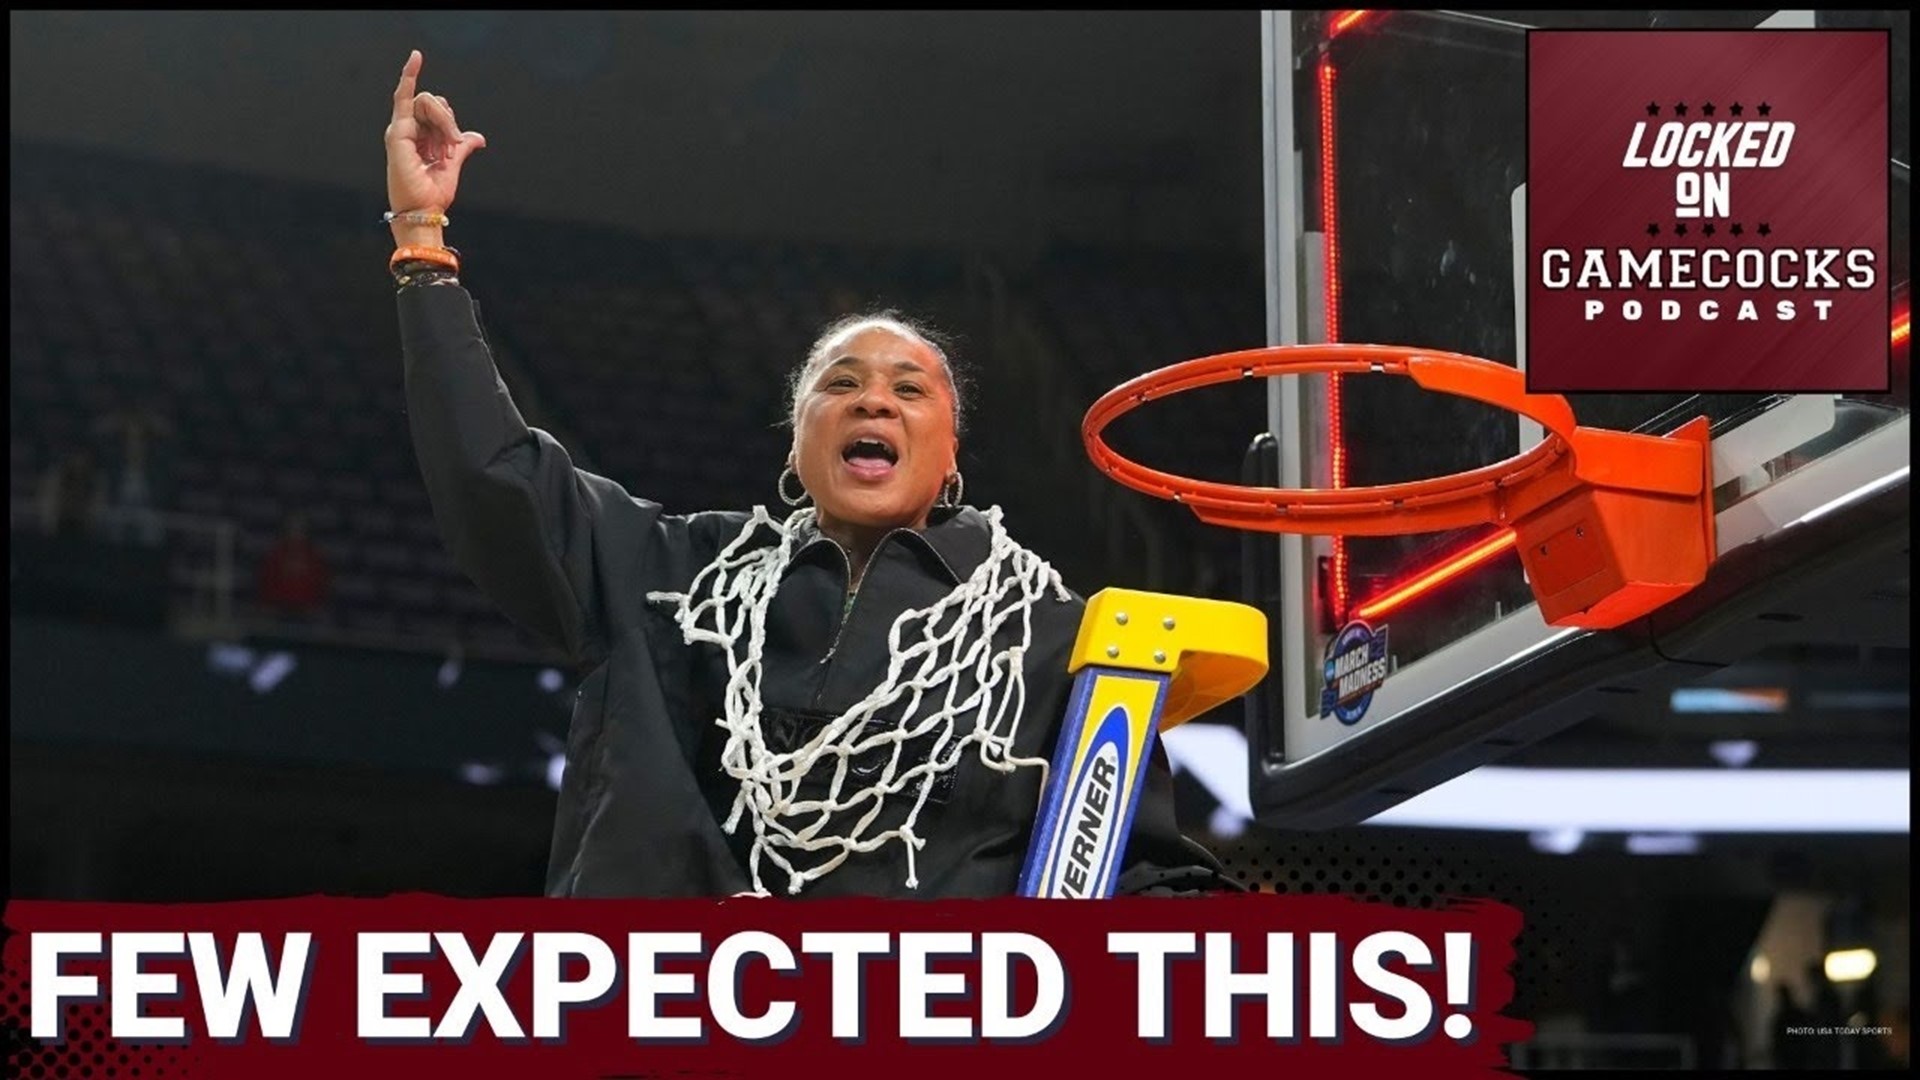 With the Gamecocks once again undefeated and heading back to the Final Four, it's time we discuss how this could be the best coaching job of Dawn Staley's career.